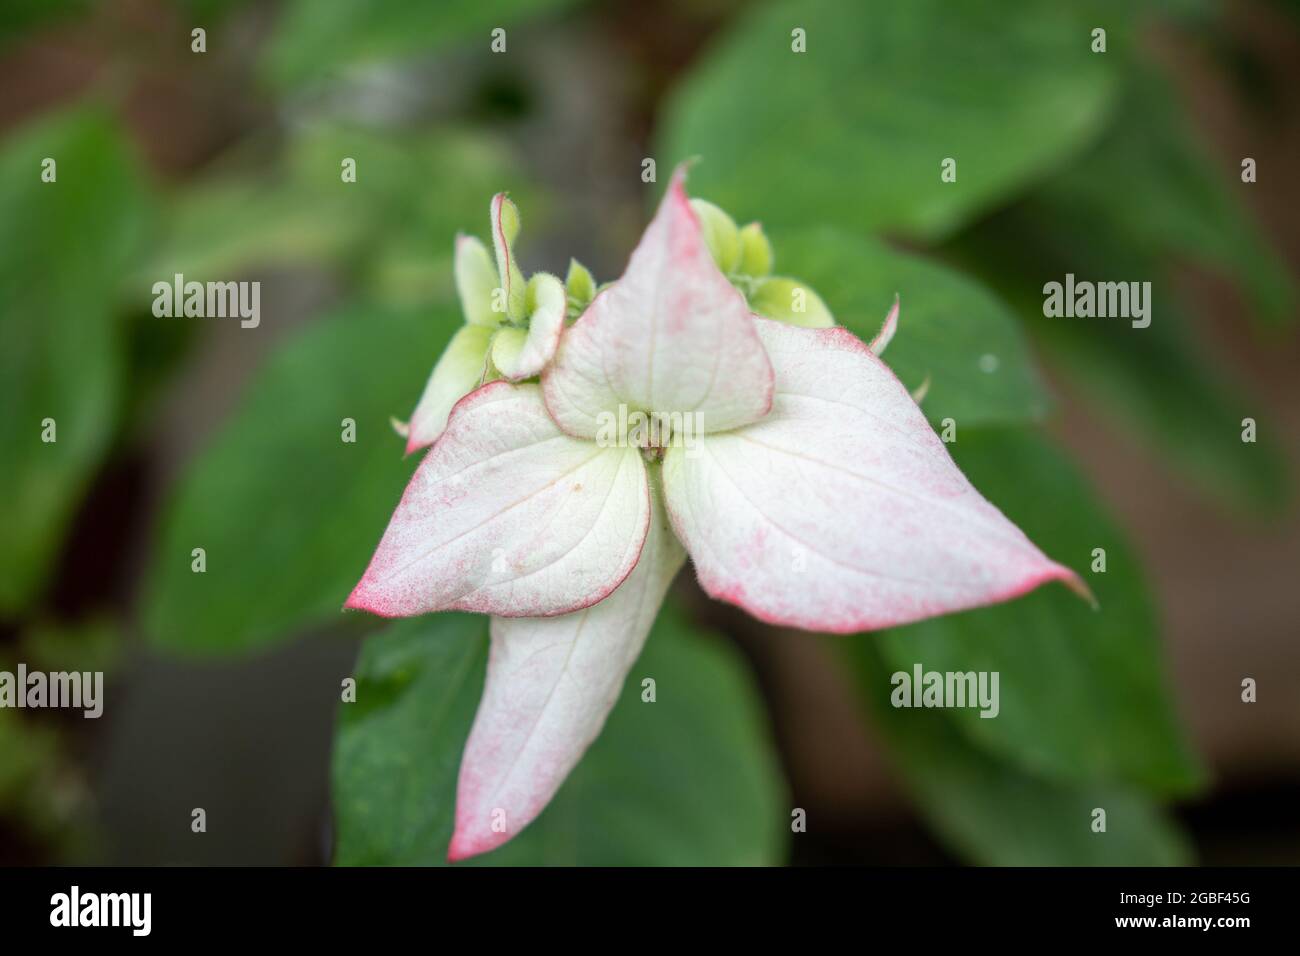 Selective focus shot of a blooming Mussaenda philippica flower Stock Photo